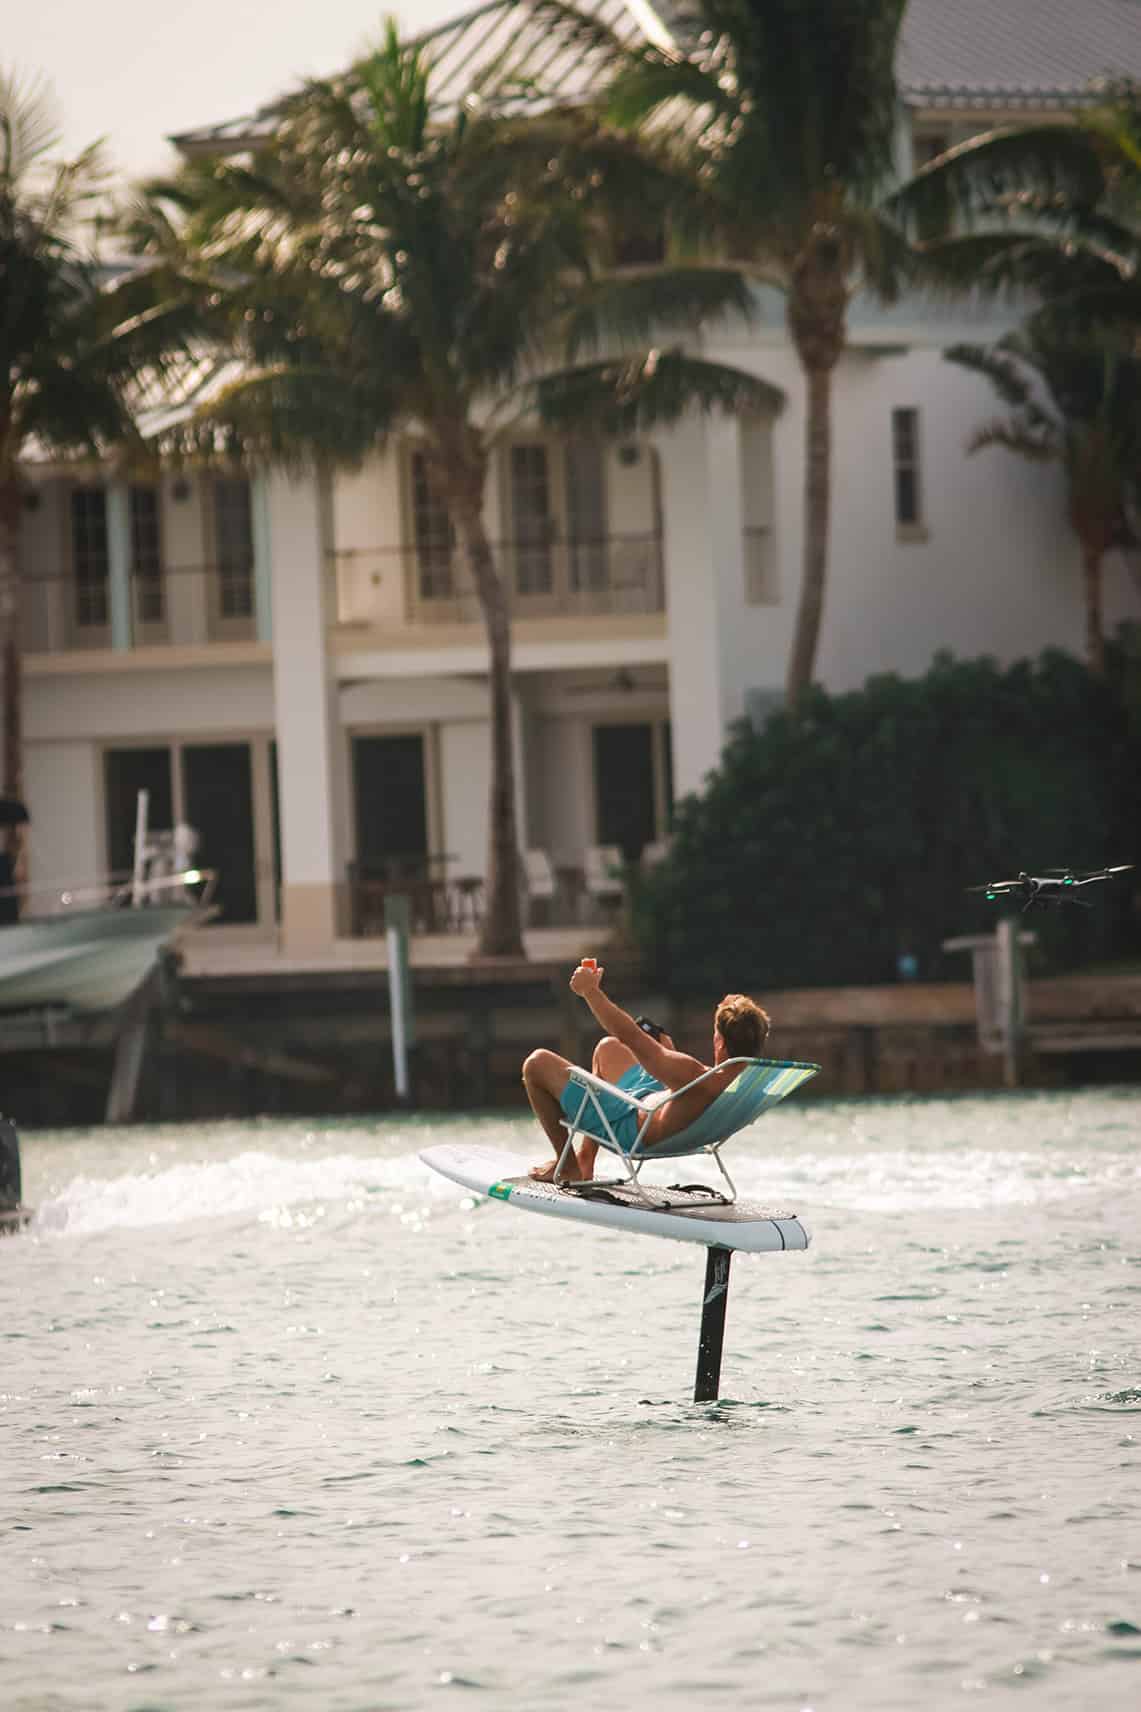 Foilboarding Changes the Face of Water Sports